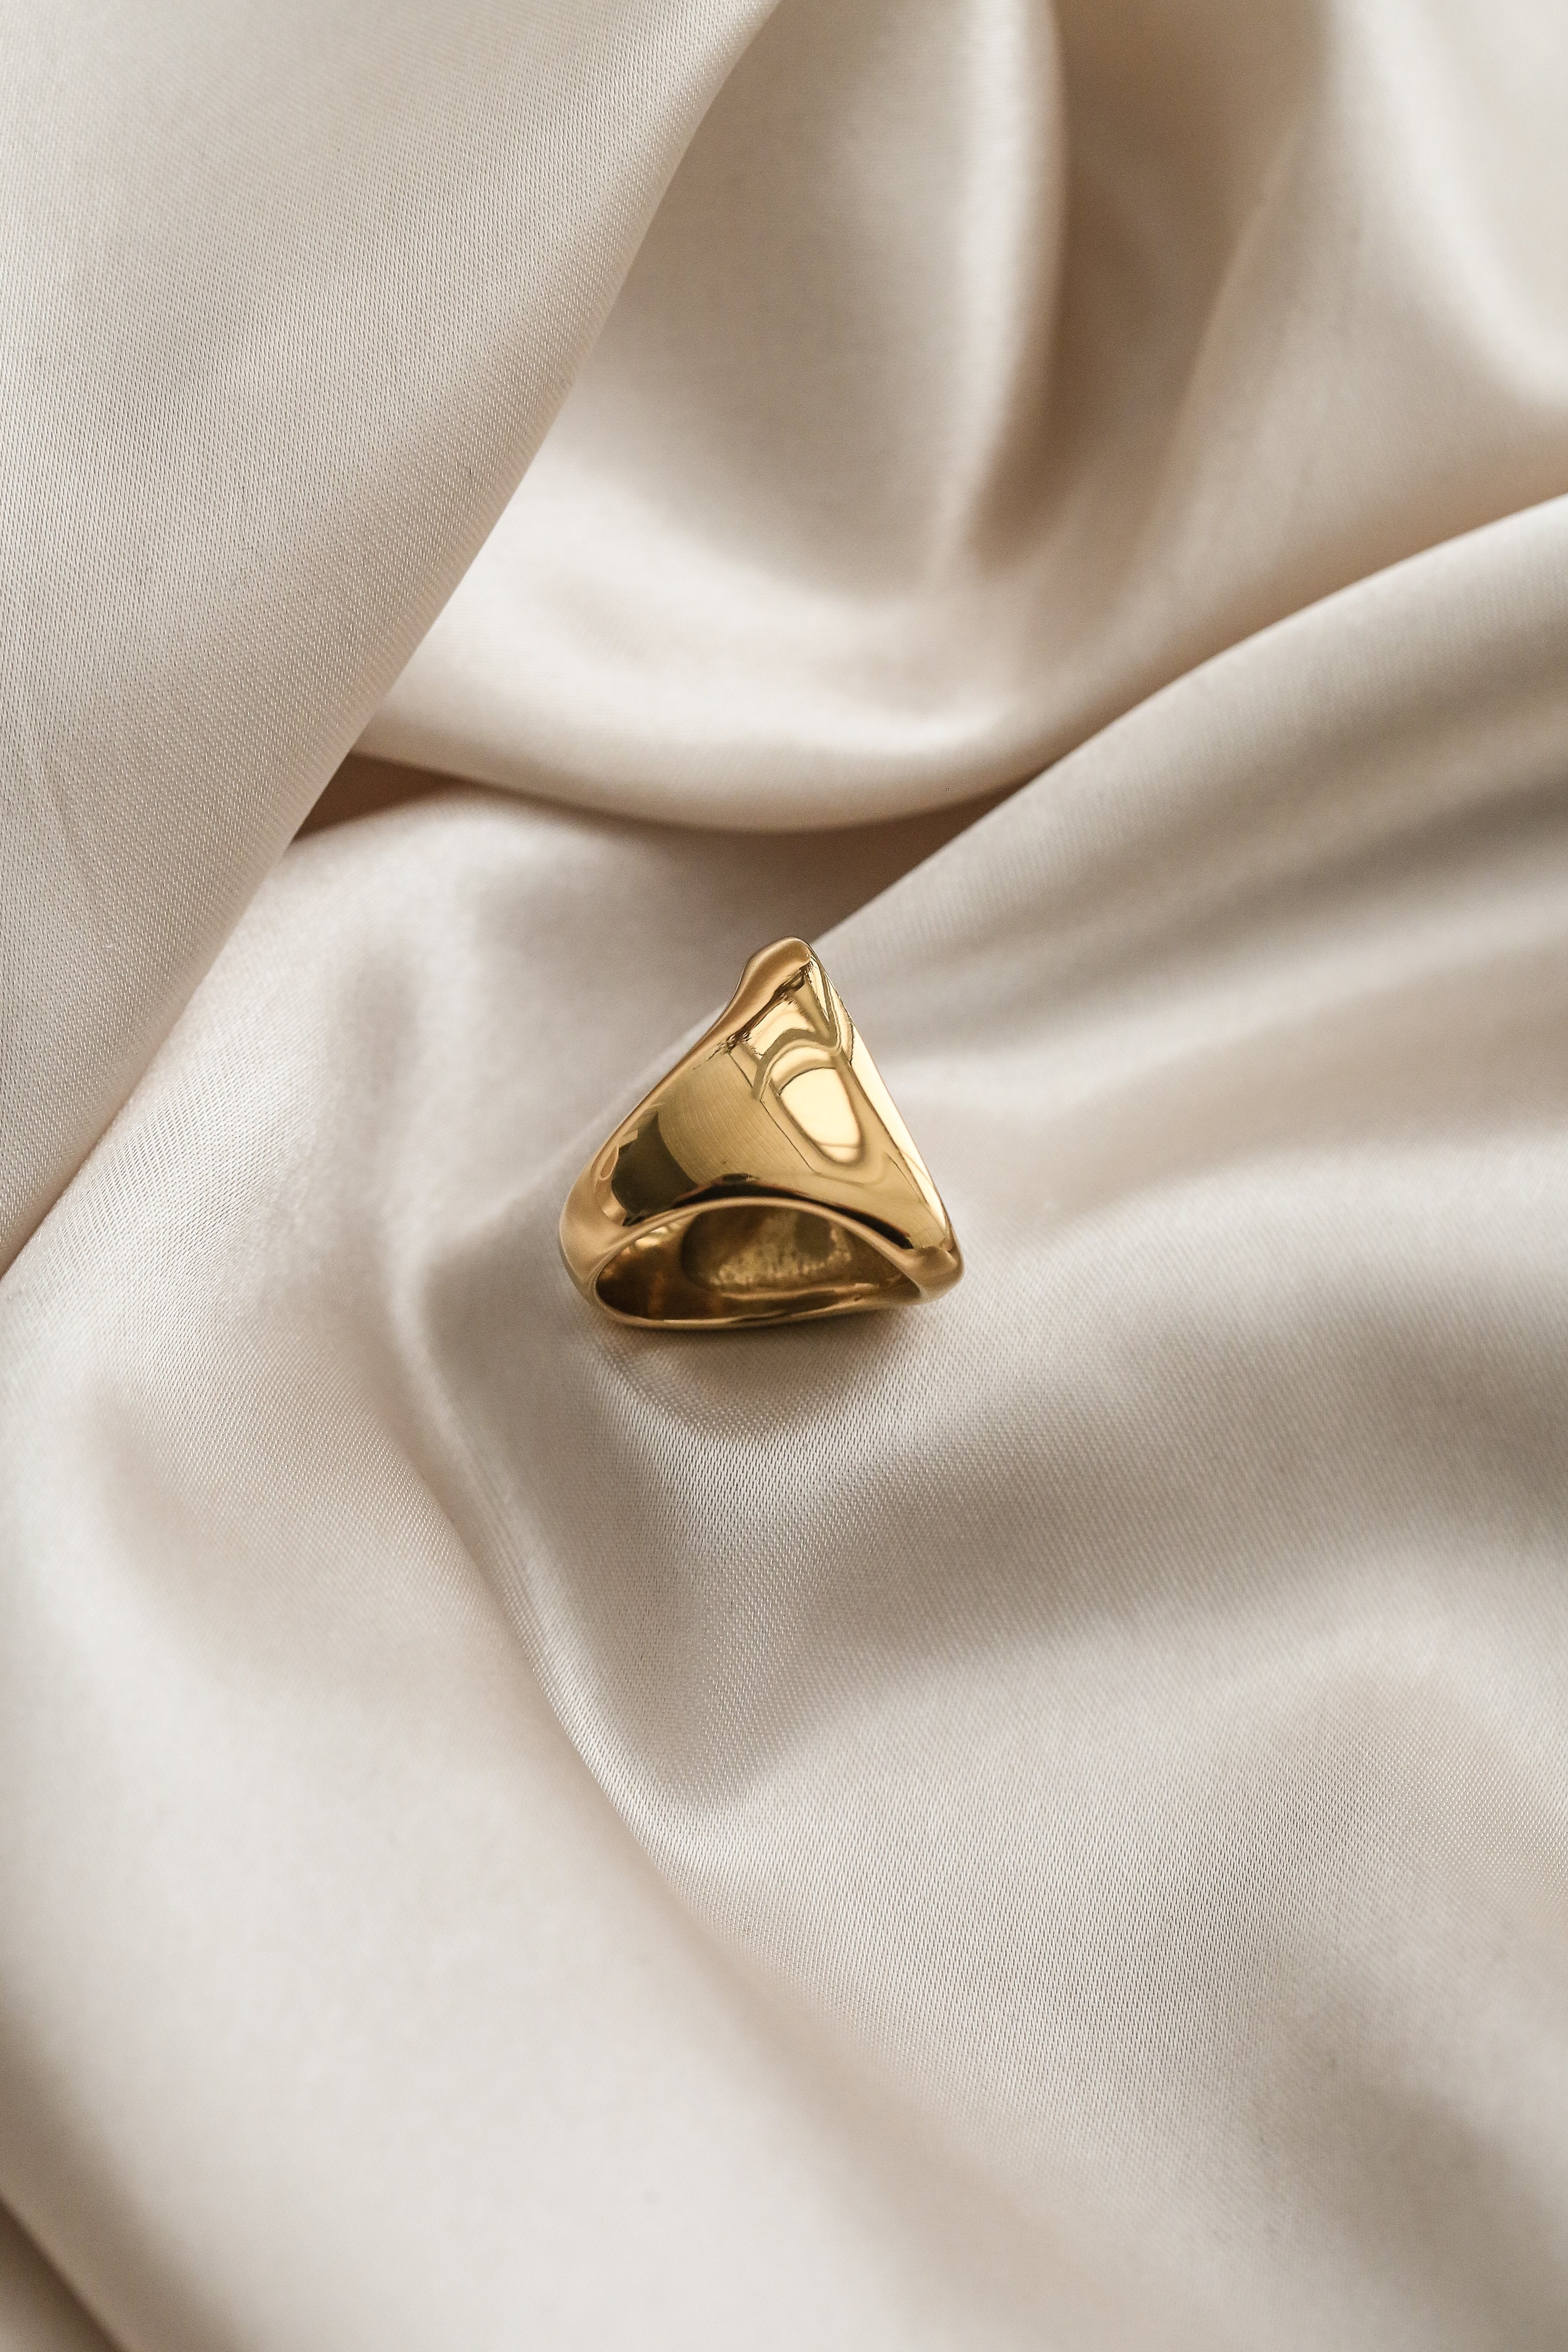 Cassandra Ring - Boutique Minimaliste has waterproof, durable, elegant and vintage inspired jewelry